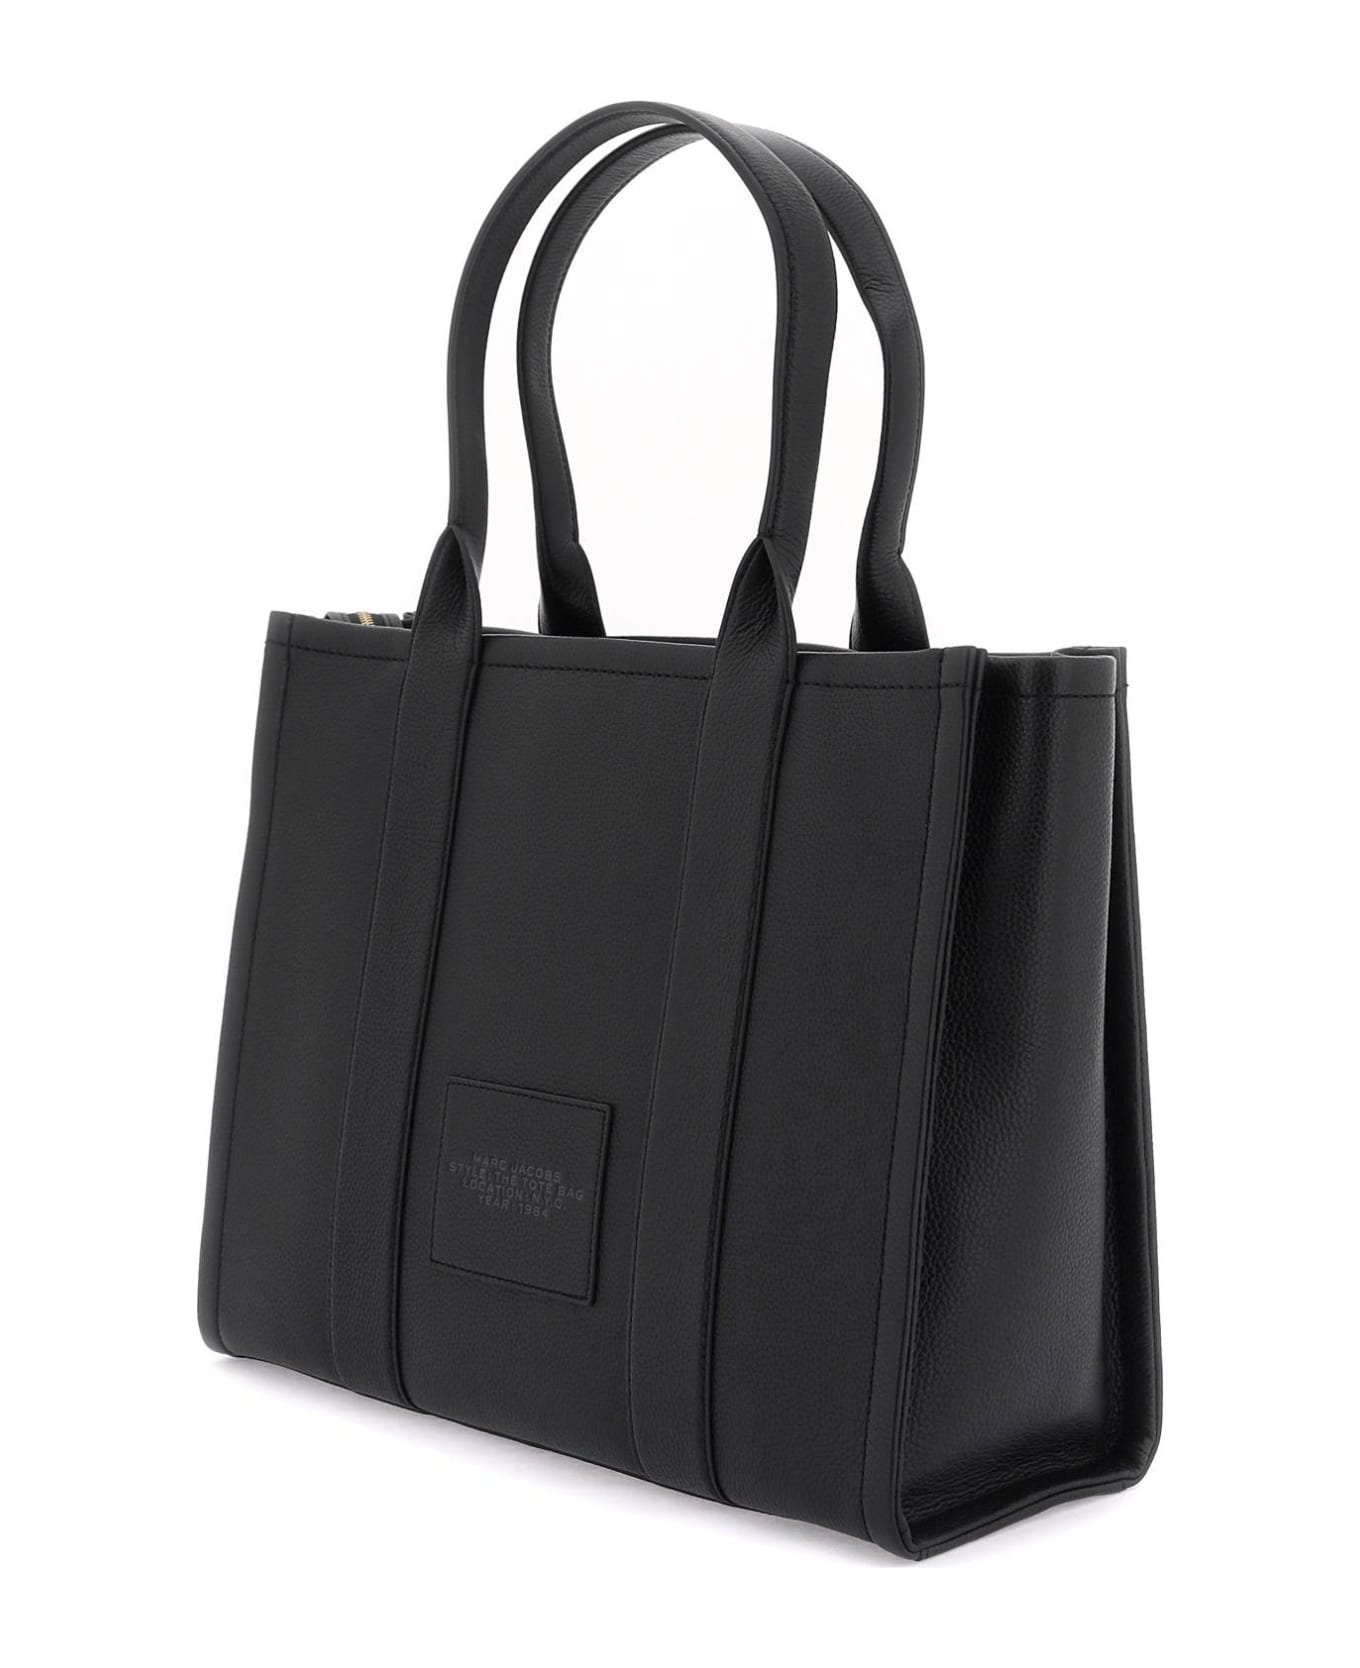 Marc Jacobs The Leather Large Tote Bag - BLACK (Black)